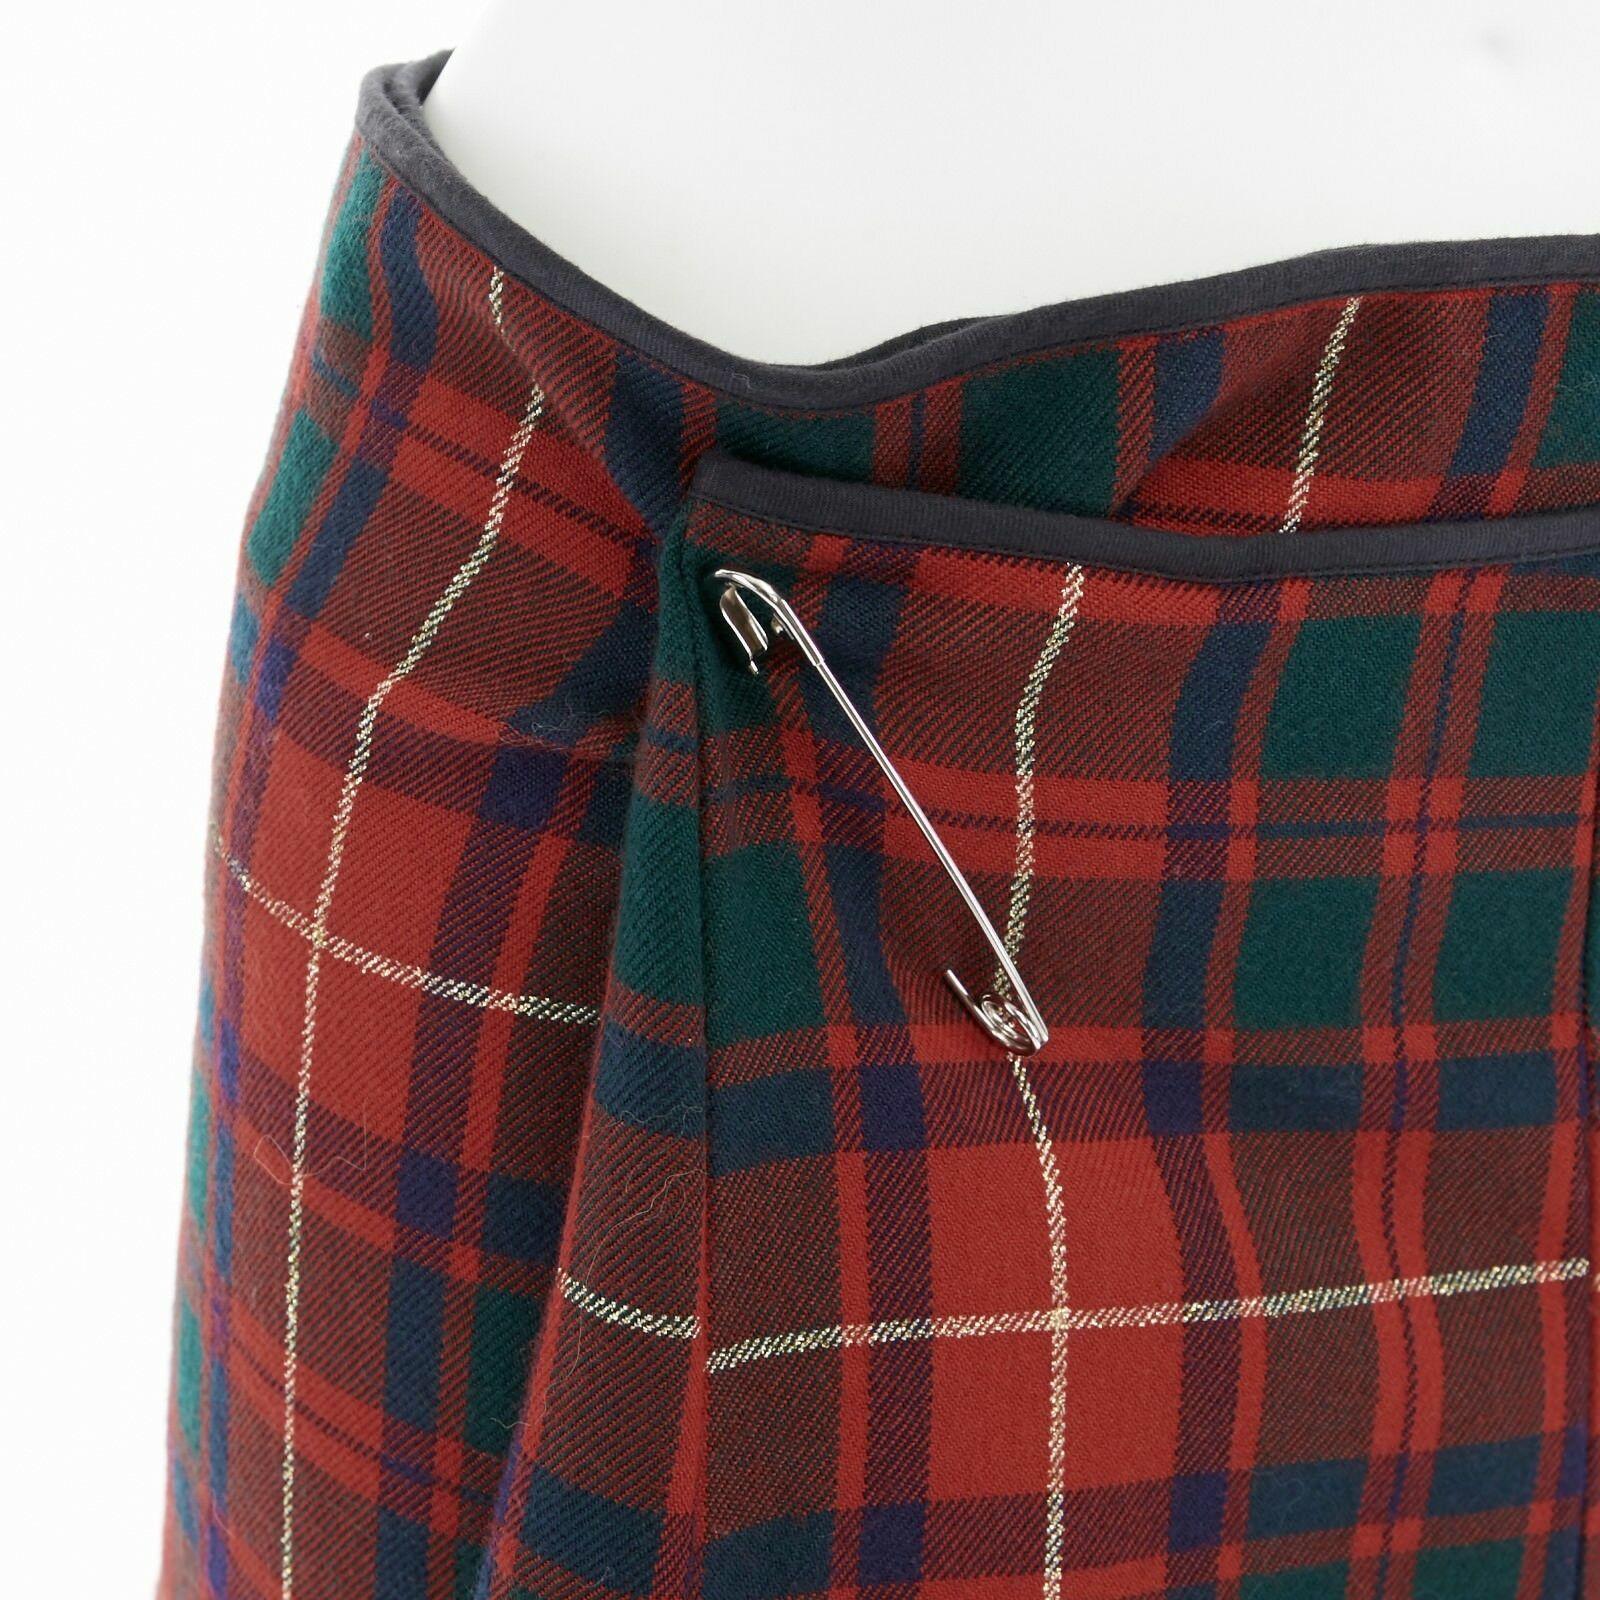 COMME DES GARCONS AW99 punk red tartan plaid ruffle hem layered wrap pin skirt M
COMME DES GARCONS
FROM THE FALL WINTER 1999 COLLECTION
100% wool. Red, green, navy punk-inspired plaid tartan wool. 
Dual layered. Self wrap around skirt. 
Does not